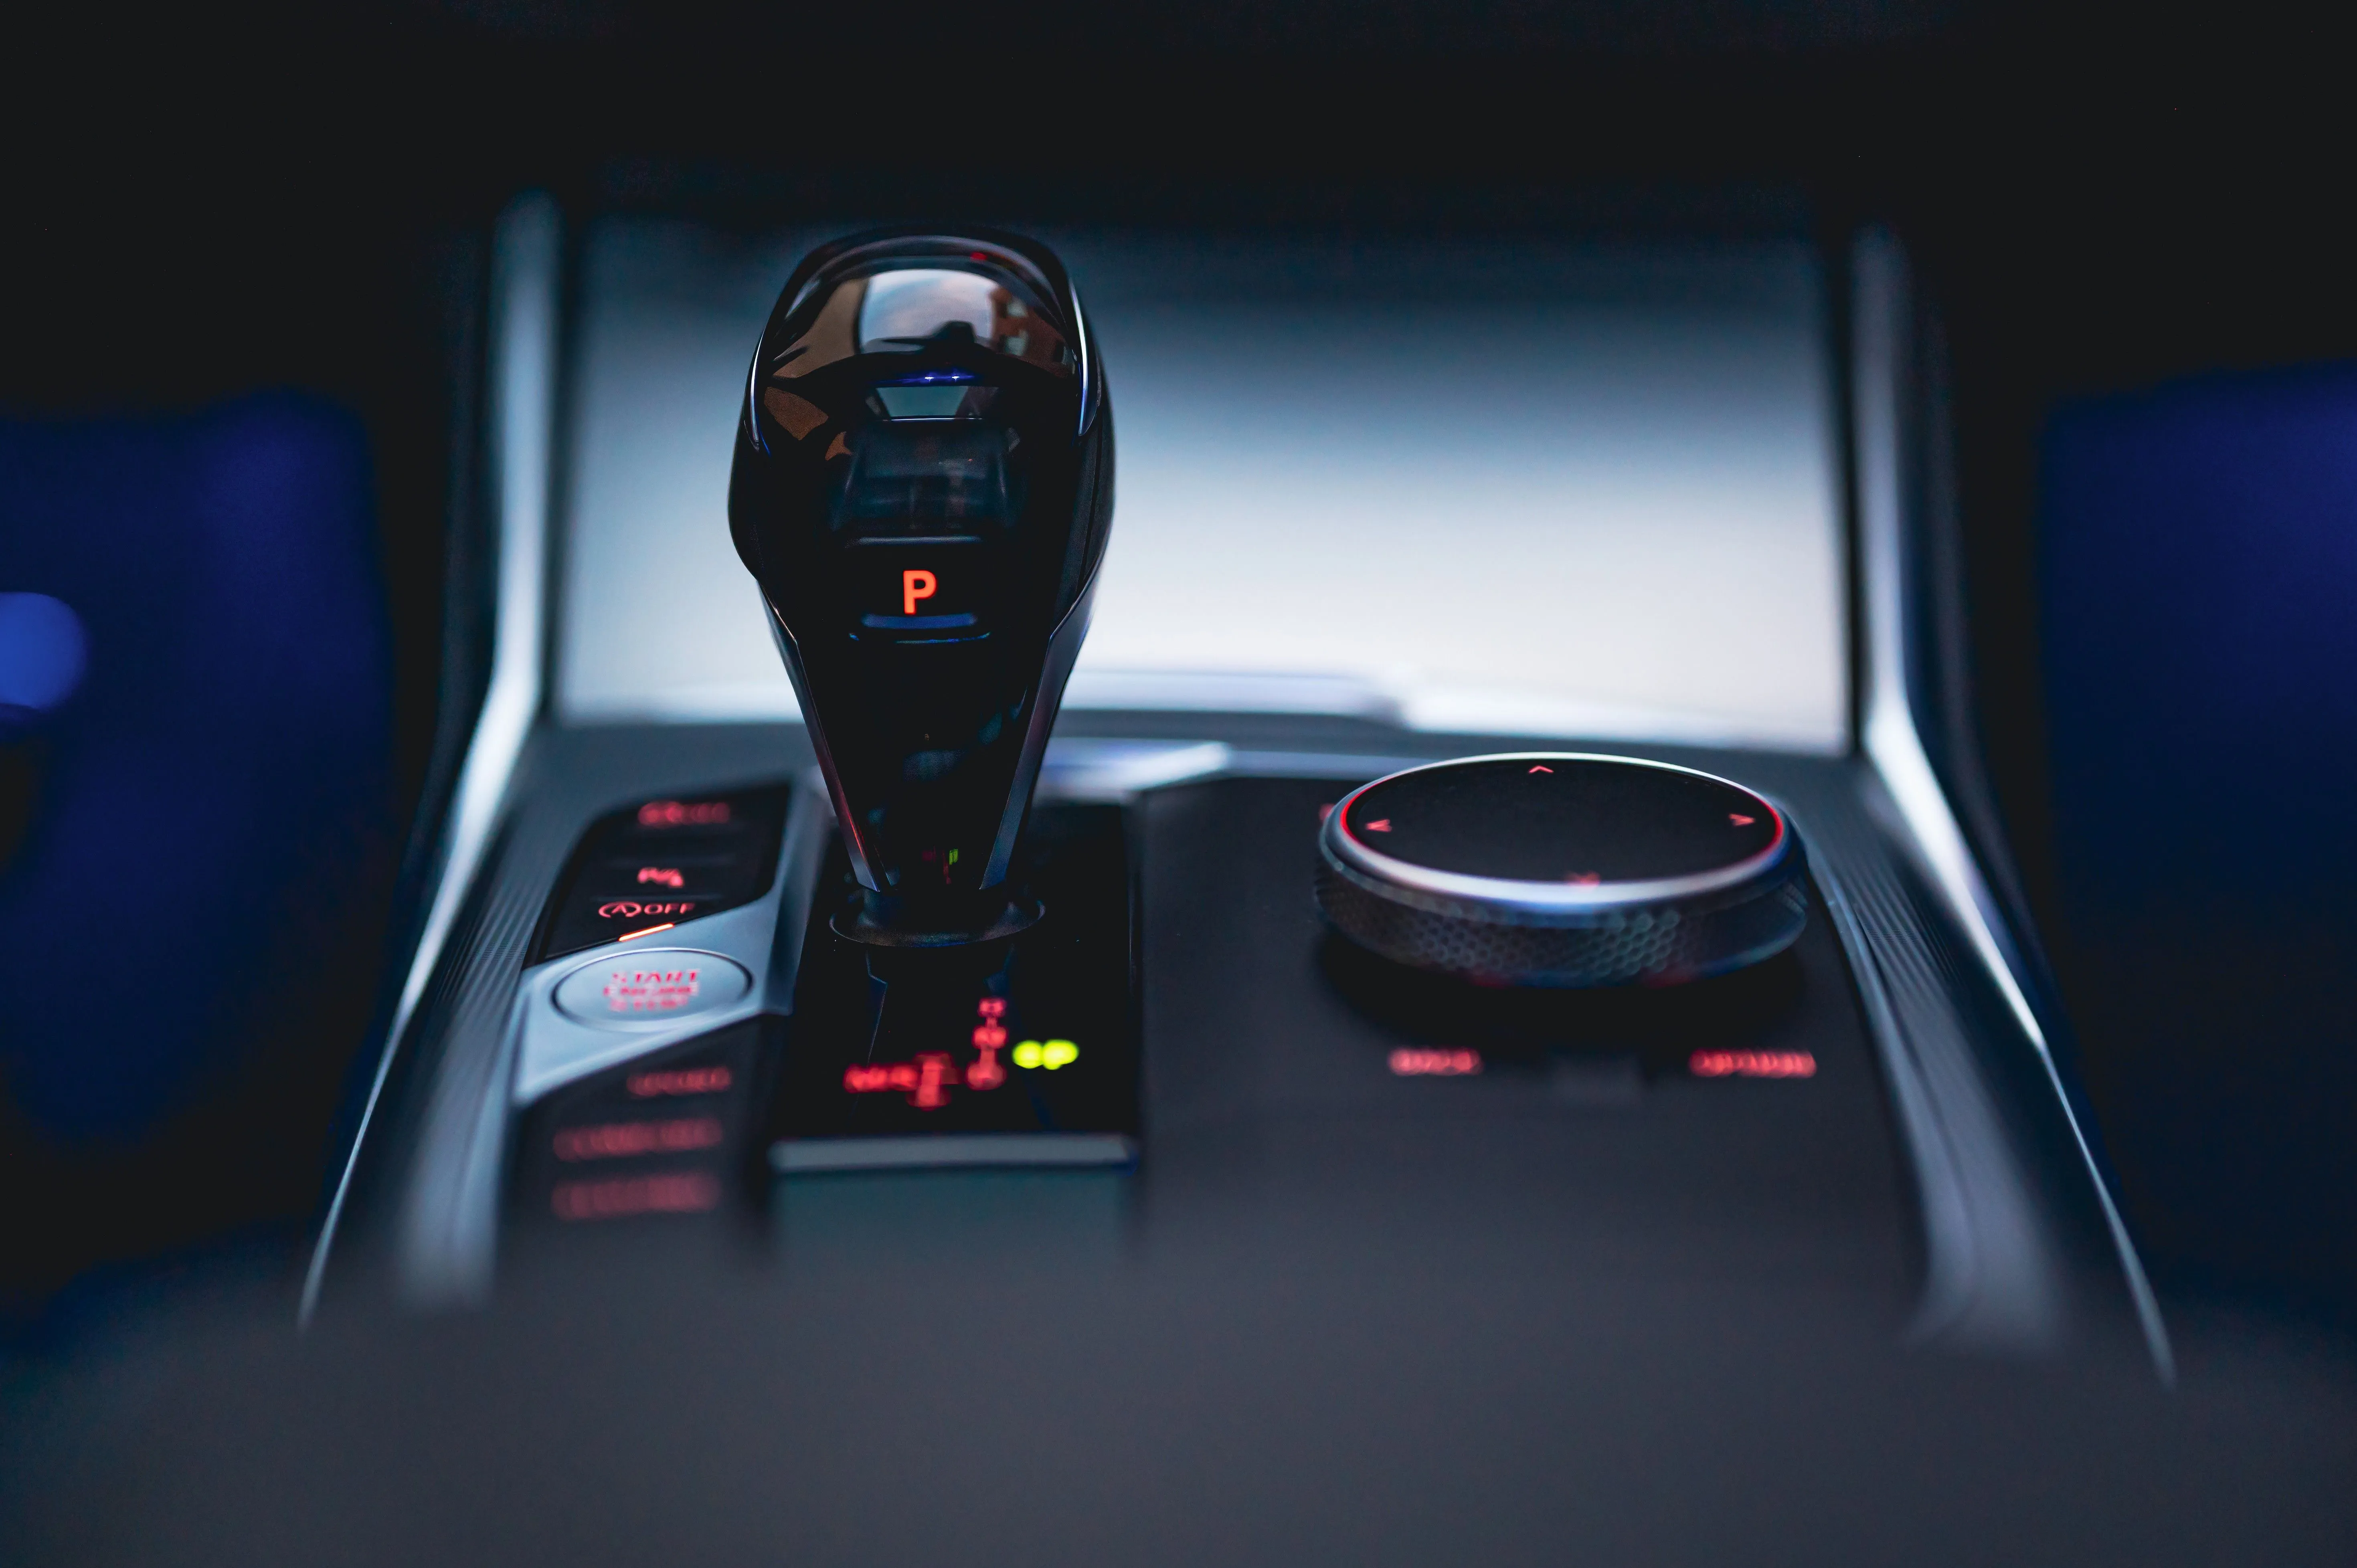 Close-up of an automatic gear stick and vehicle console in blue ambient lighting.